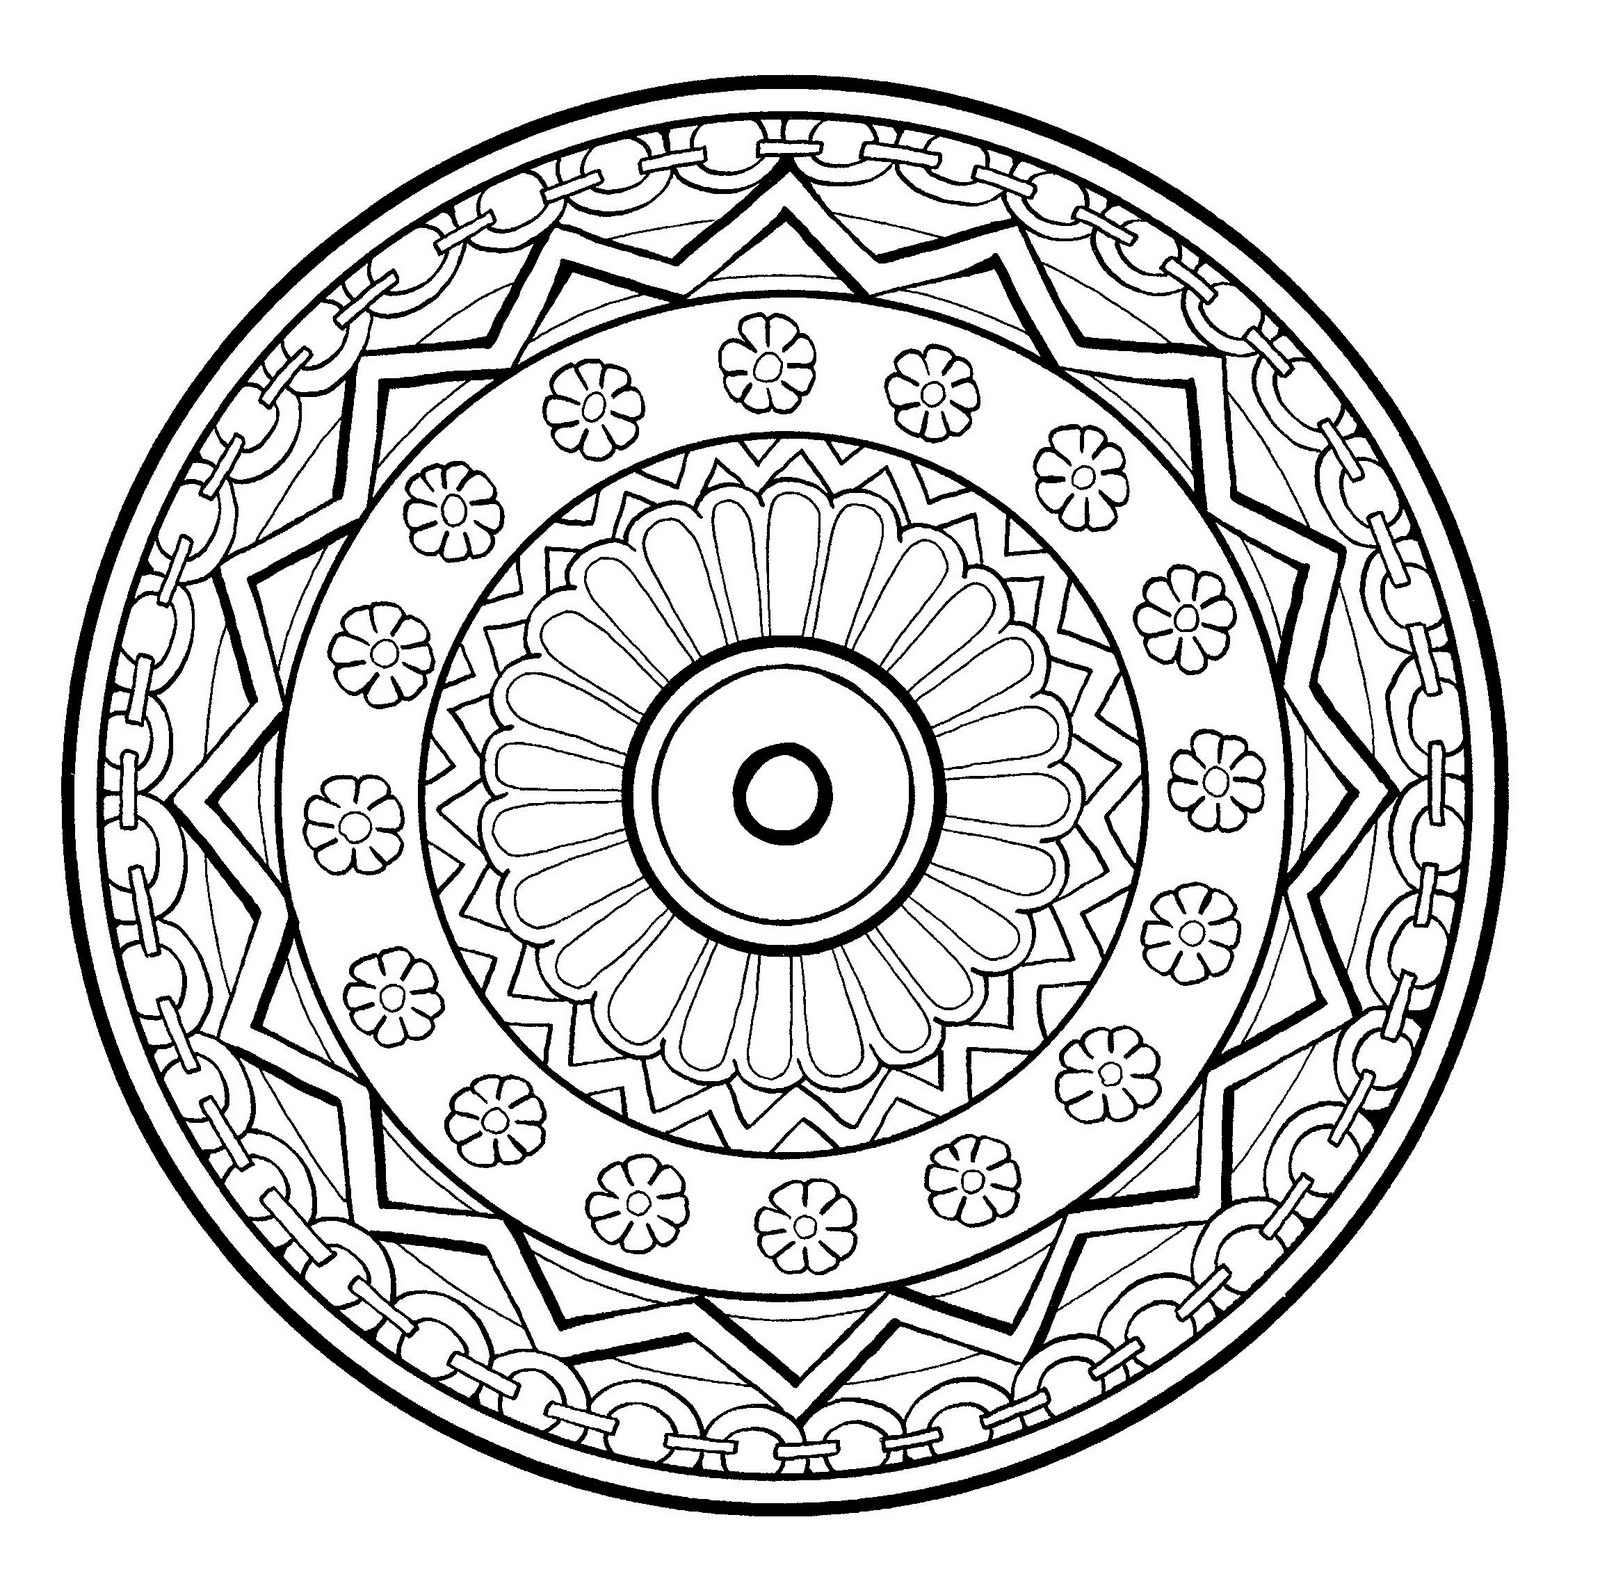 Abstract but very natural Mandala coloring sheet. A magnificent vegetation invades this magnificent Mandala : flowers, leaves ... Do whatever it takes to get rid of any distractions that may interfere with your coloring.